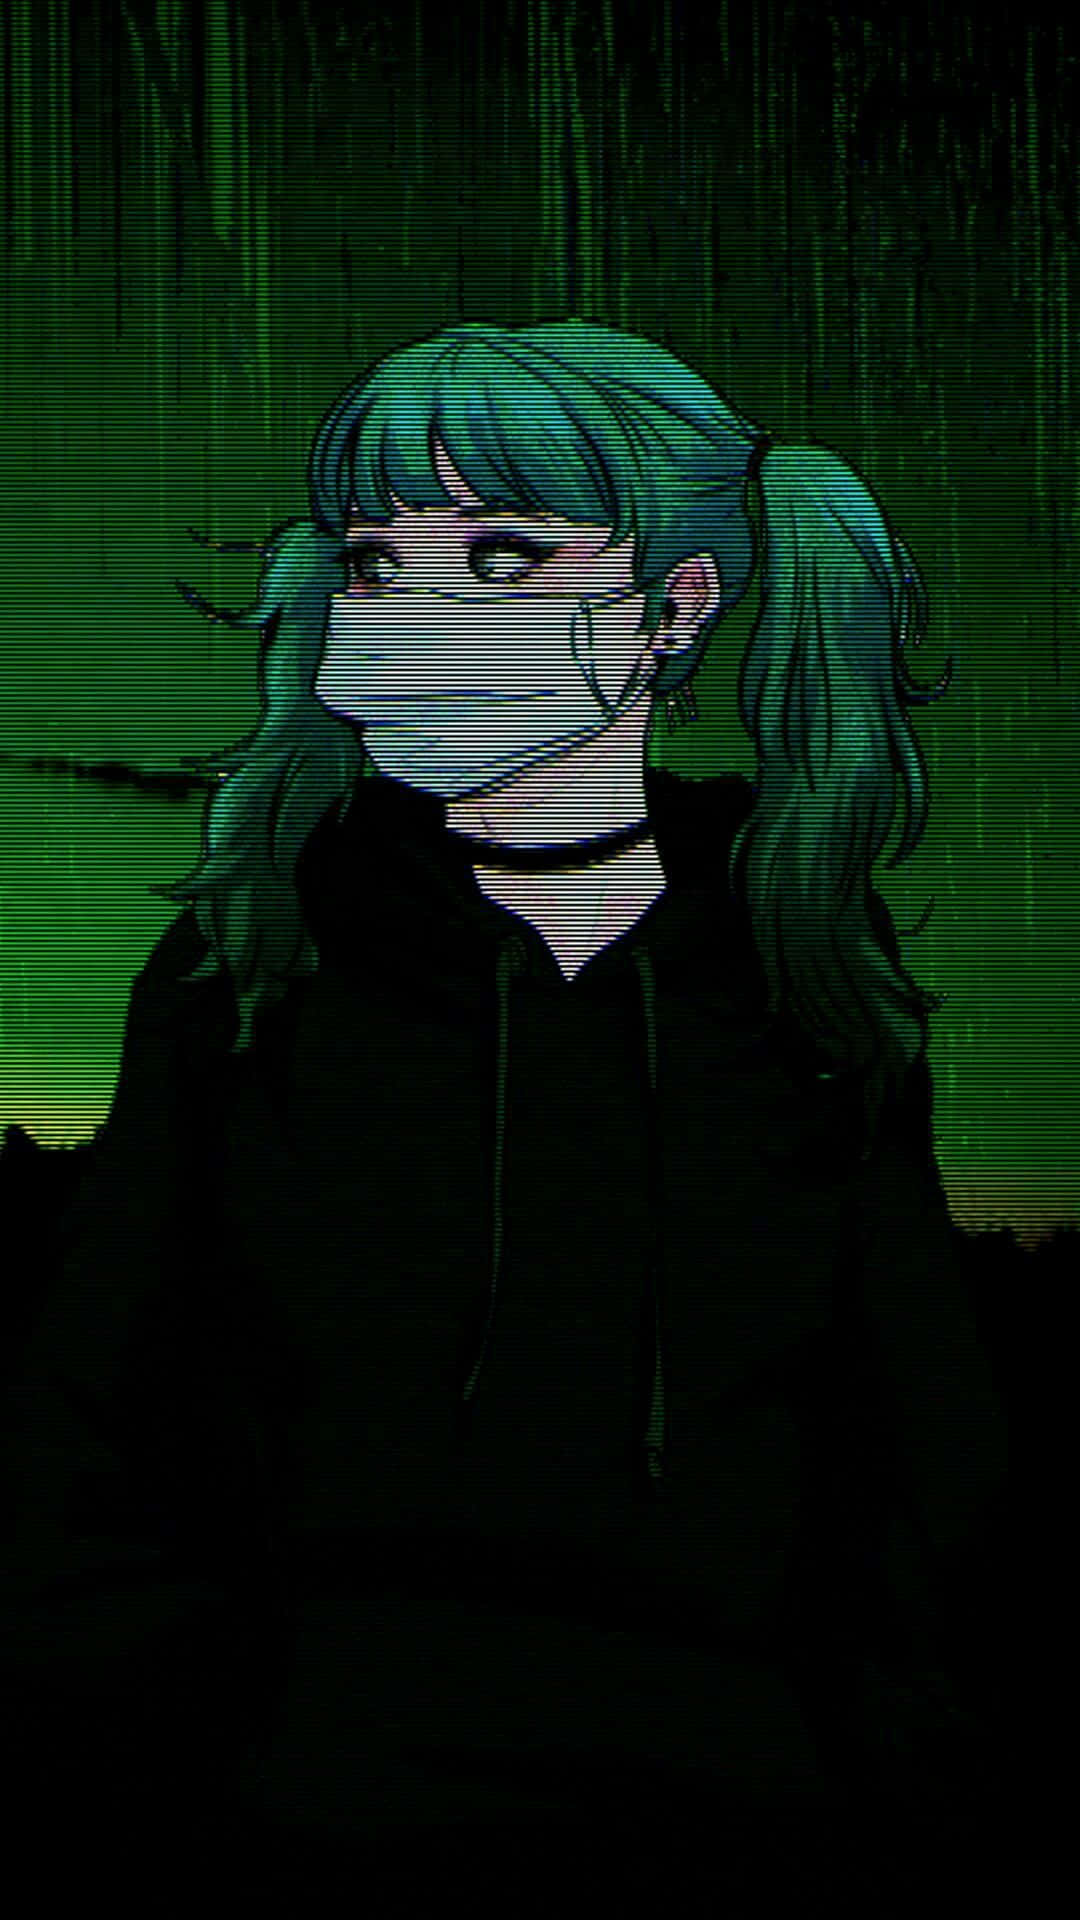 Sad Aesthetic Anime Girl With Green Pigtails Wallpaper